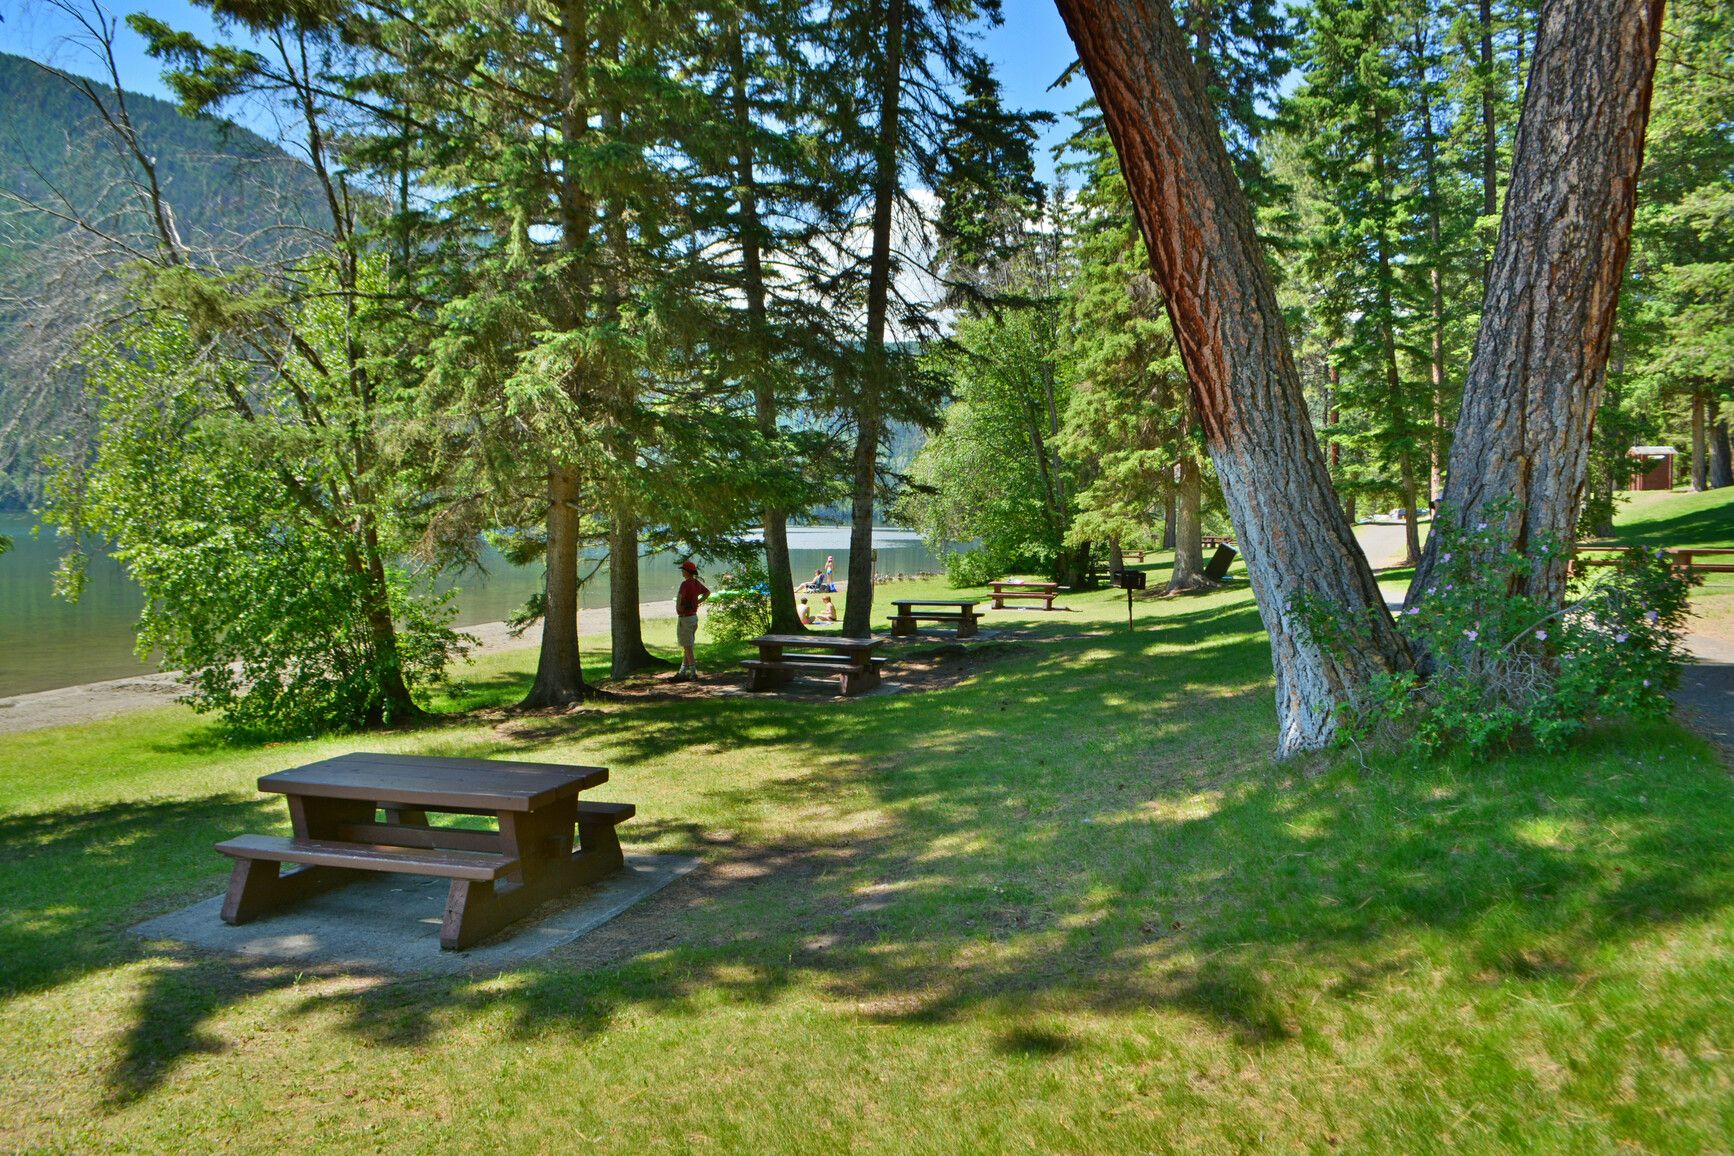 Day-use picnic and beach area at Paul Lake Park, with large shade trees providing coverage from the sun on hot days.